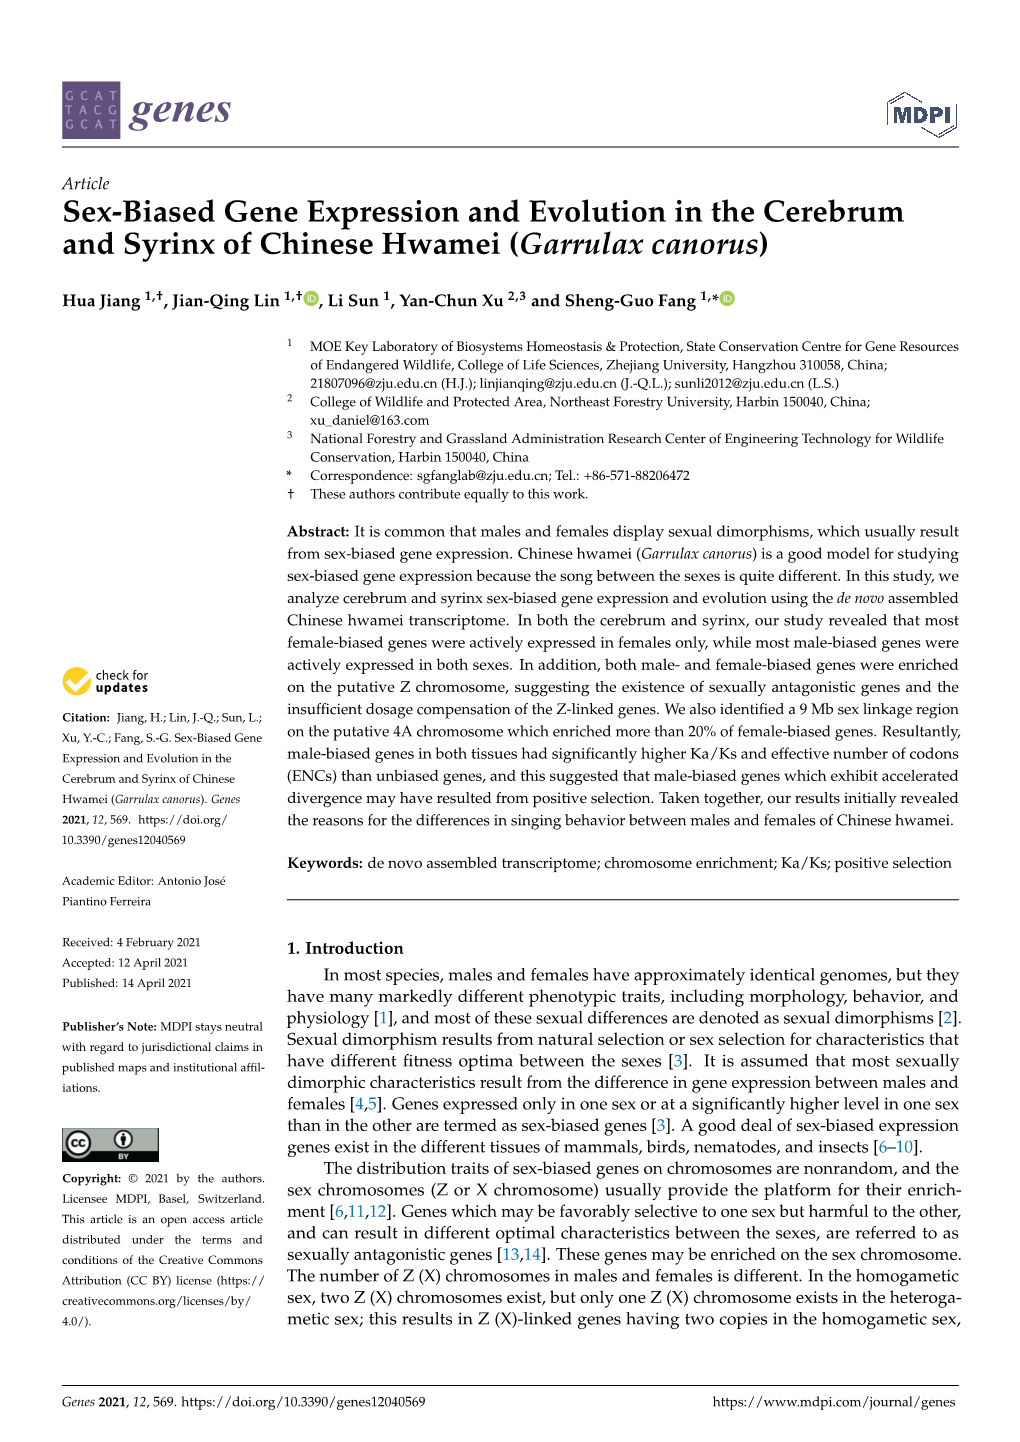 Sex-Biased Gene Expression and Evolution in the Cerebrum and Syrinx of Chinese Hwamei (Garrulax Canorus)